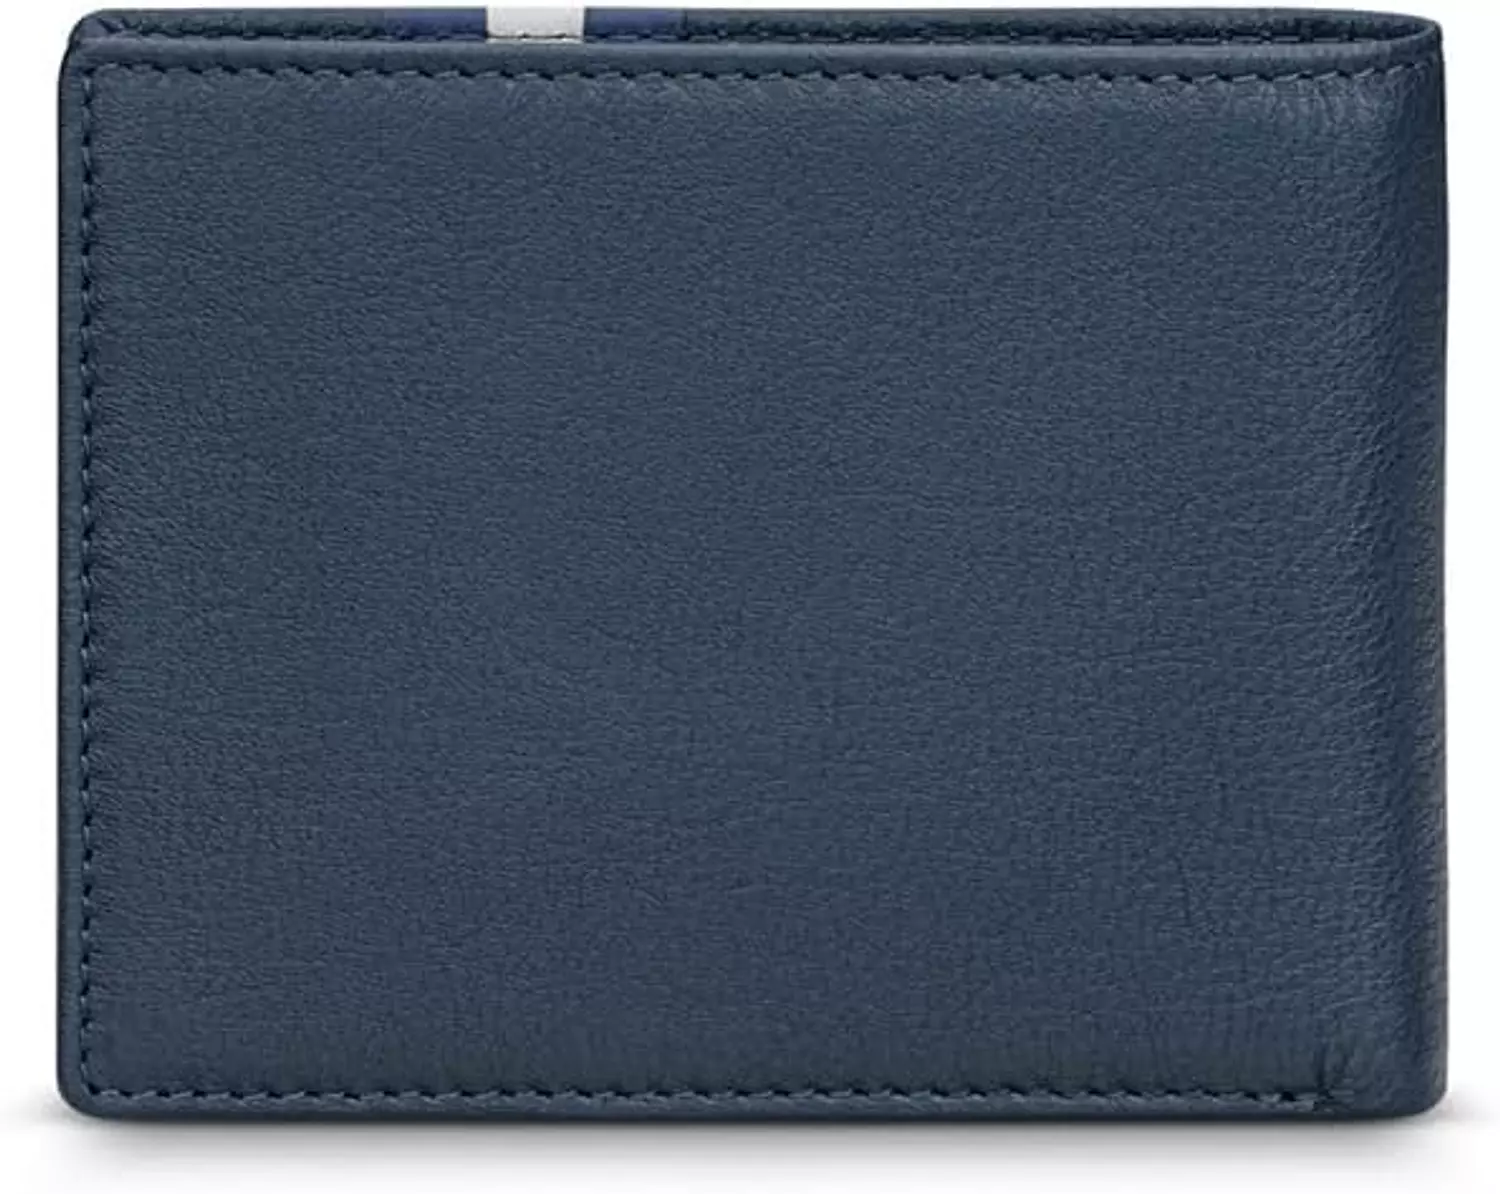 POLICE - Gala Wallet For Men Blue And Off White - PELGW2203202 1